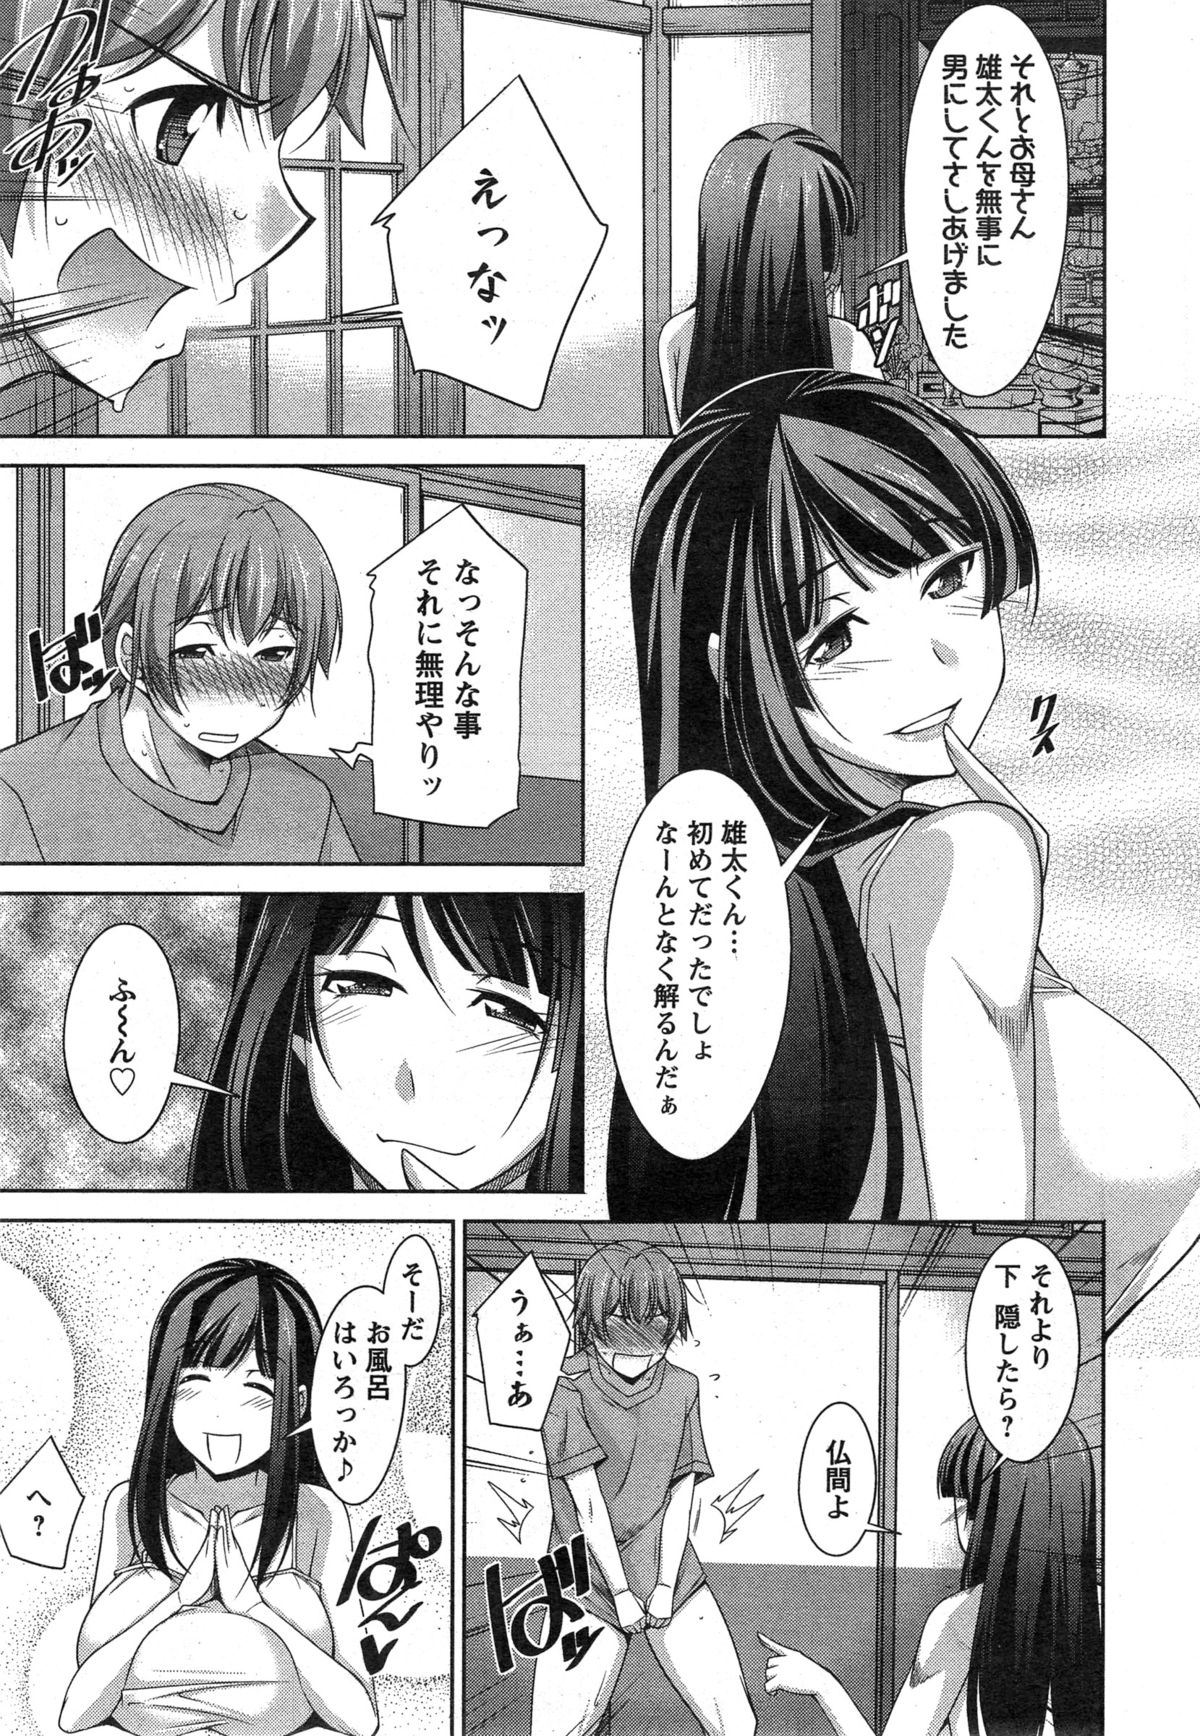 Action Pizazz DX 2014-12 page 23 full